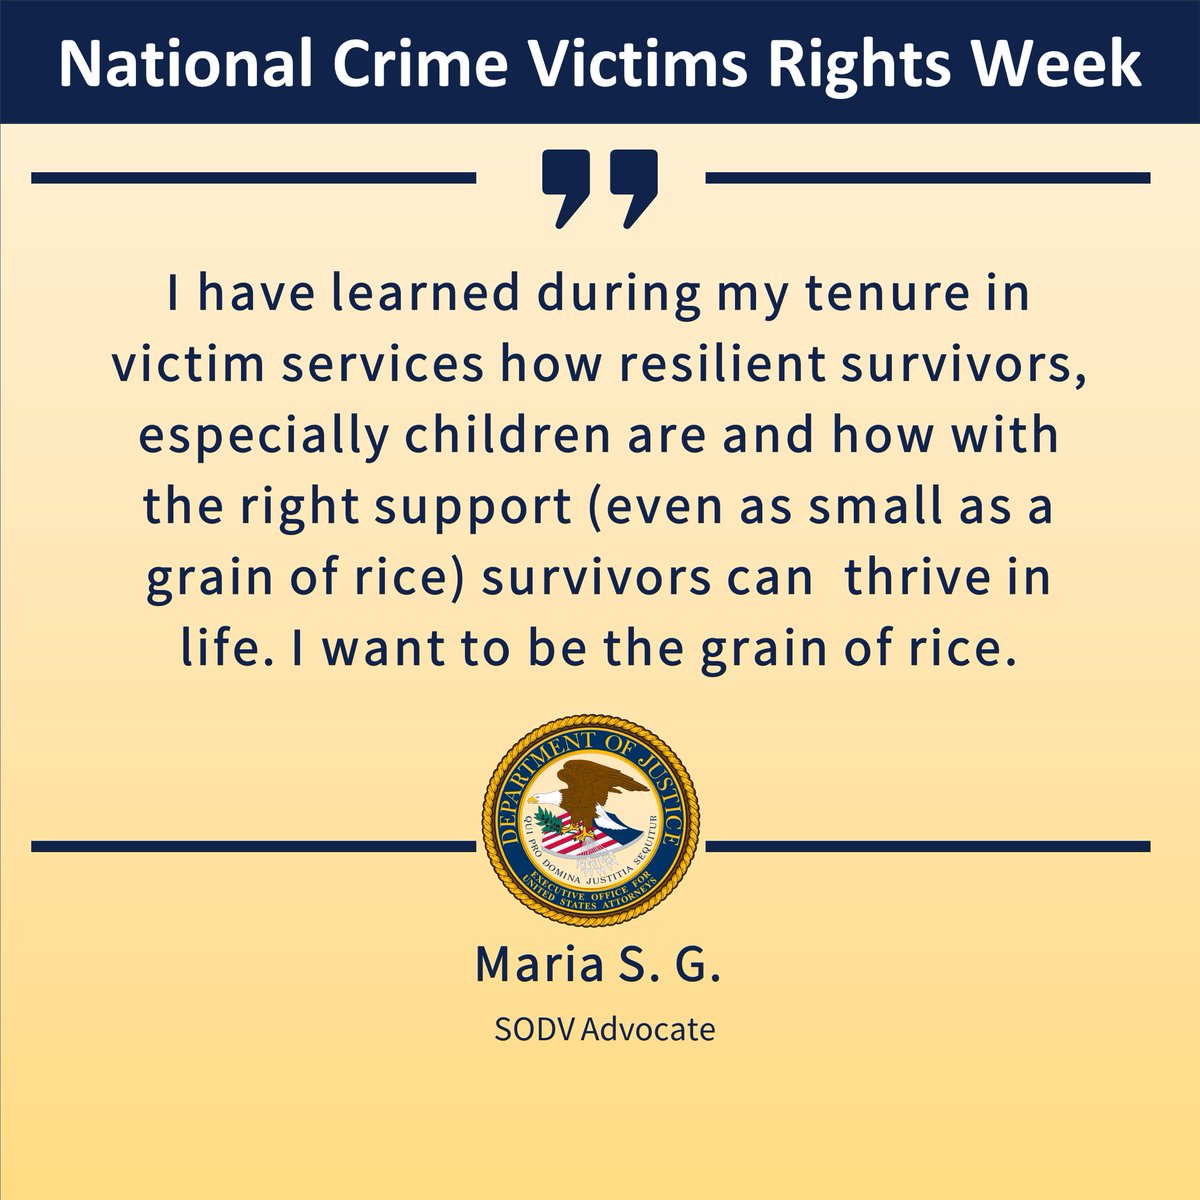 Hear what our SODV Advocate Maria has to say about supporting survivors! #NCVRW2024 #SupportVictims